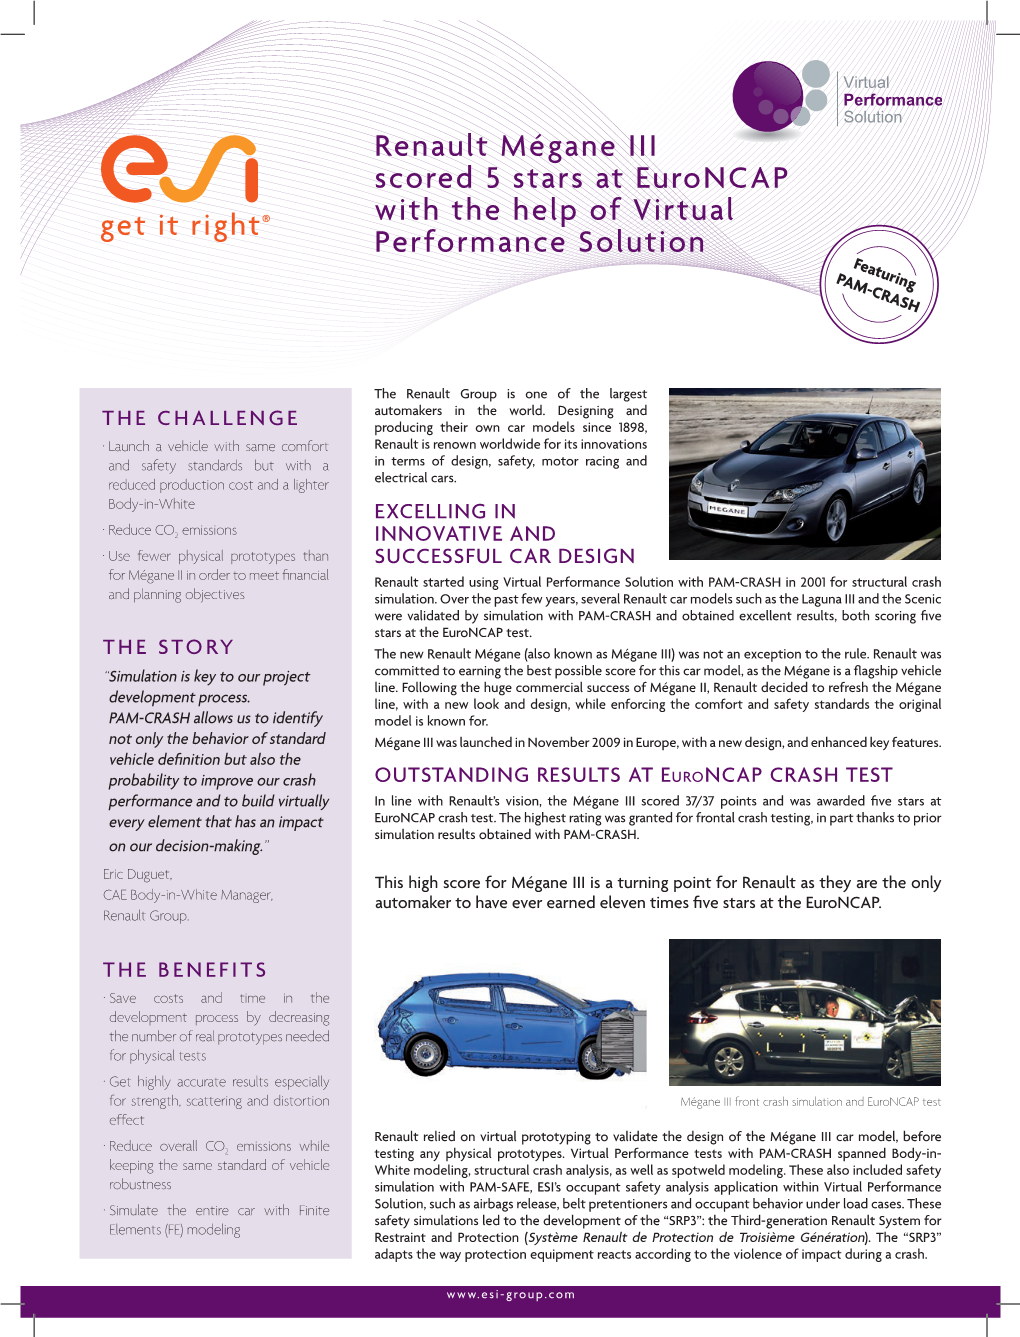 Renault Mégane III Scored 5 Stars at Euroncap with the Help of Virtual Performance Solution Featuring PAM-CRASH